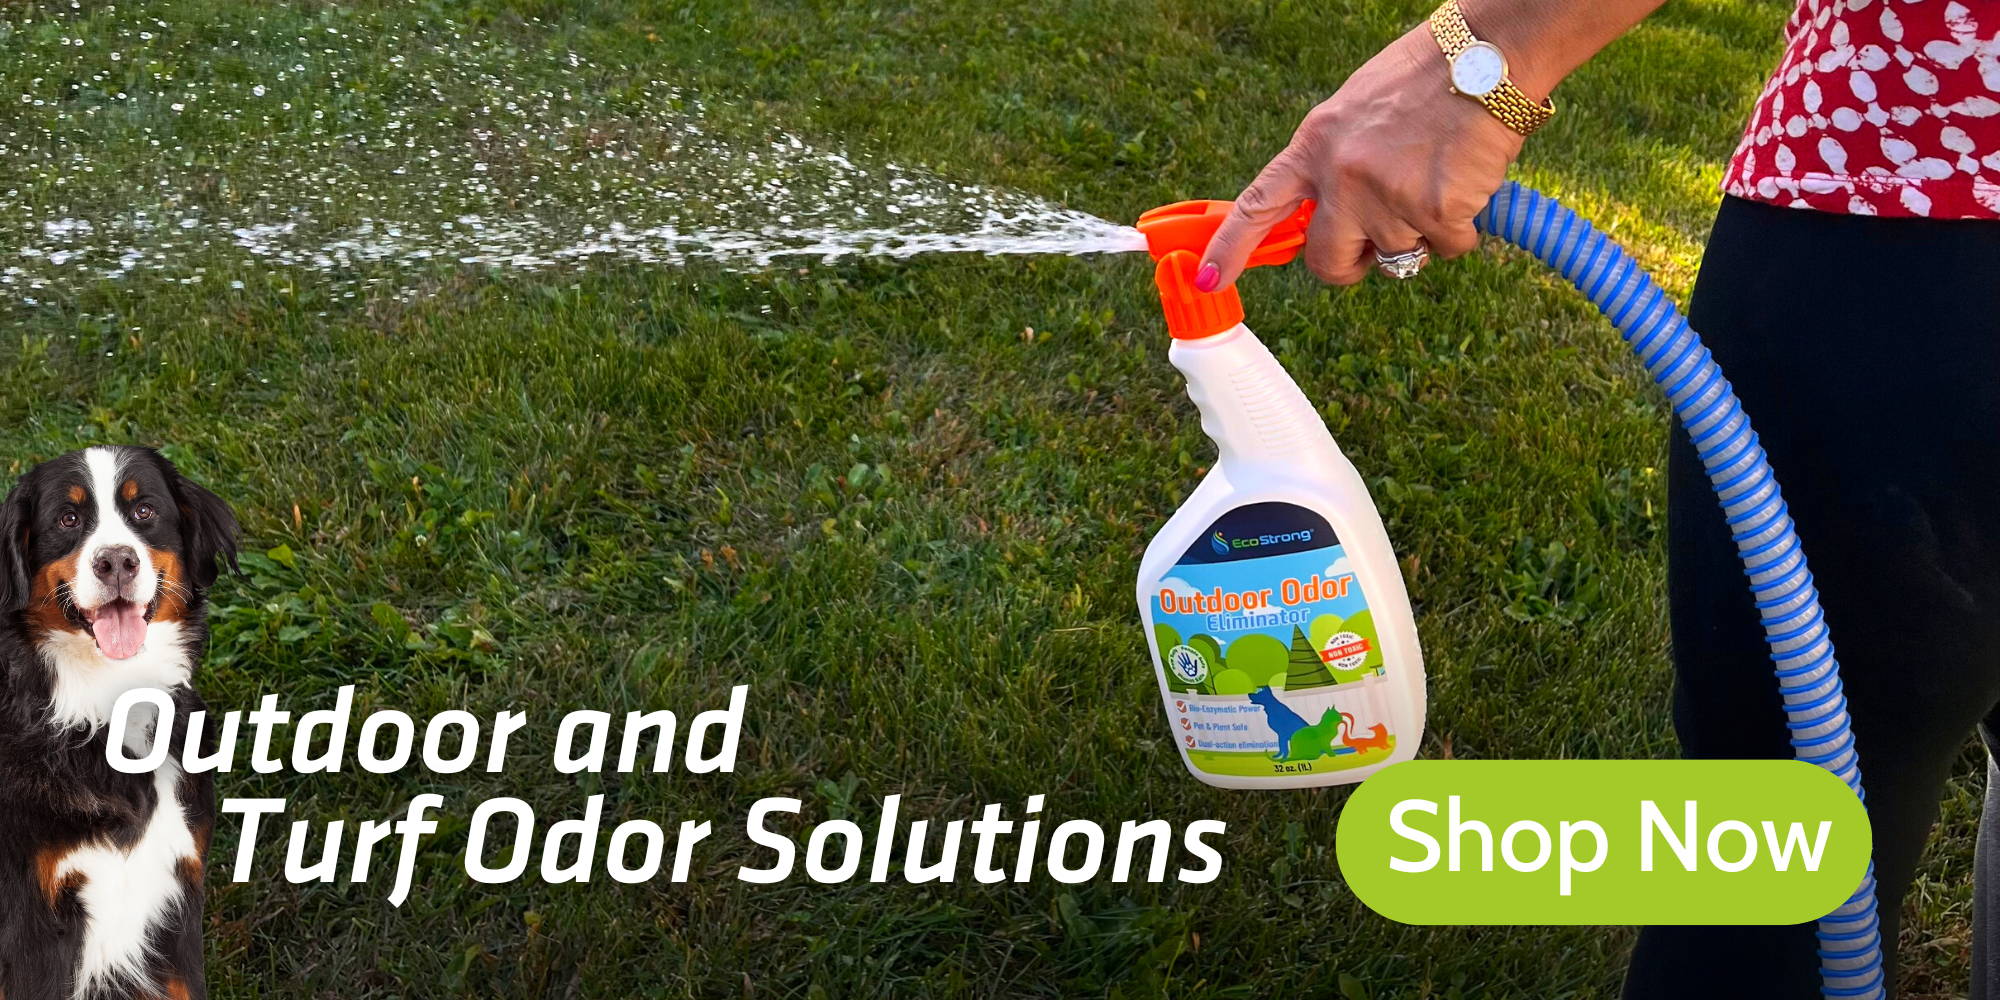 EcoStrong Outdoor Odor and Turf Products